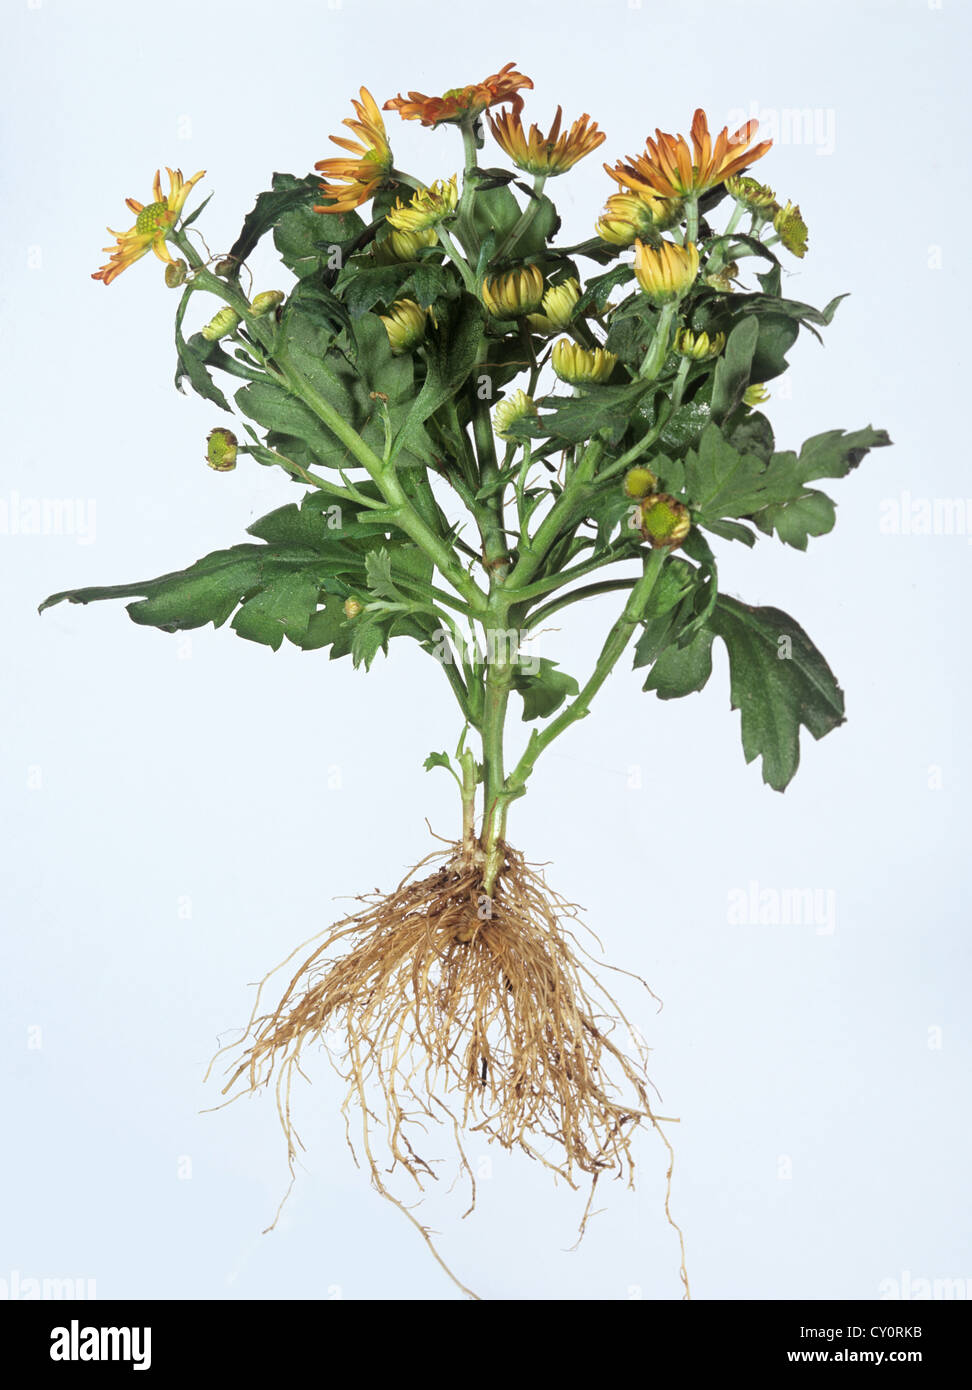 Chrysanthemum plant showing flowers, foliage and roots